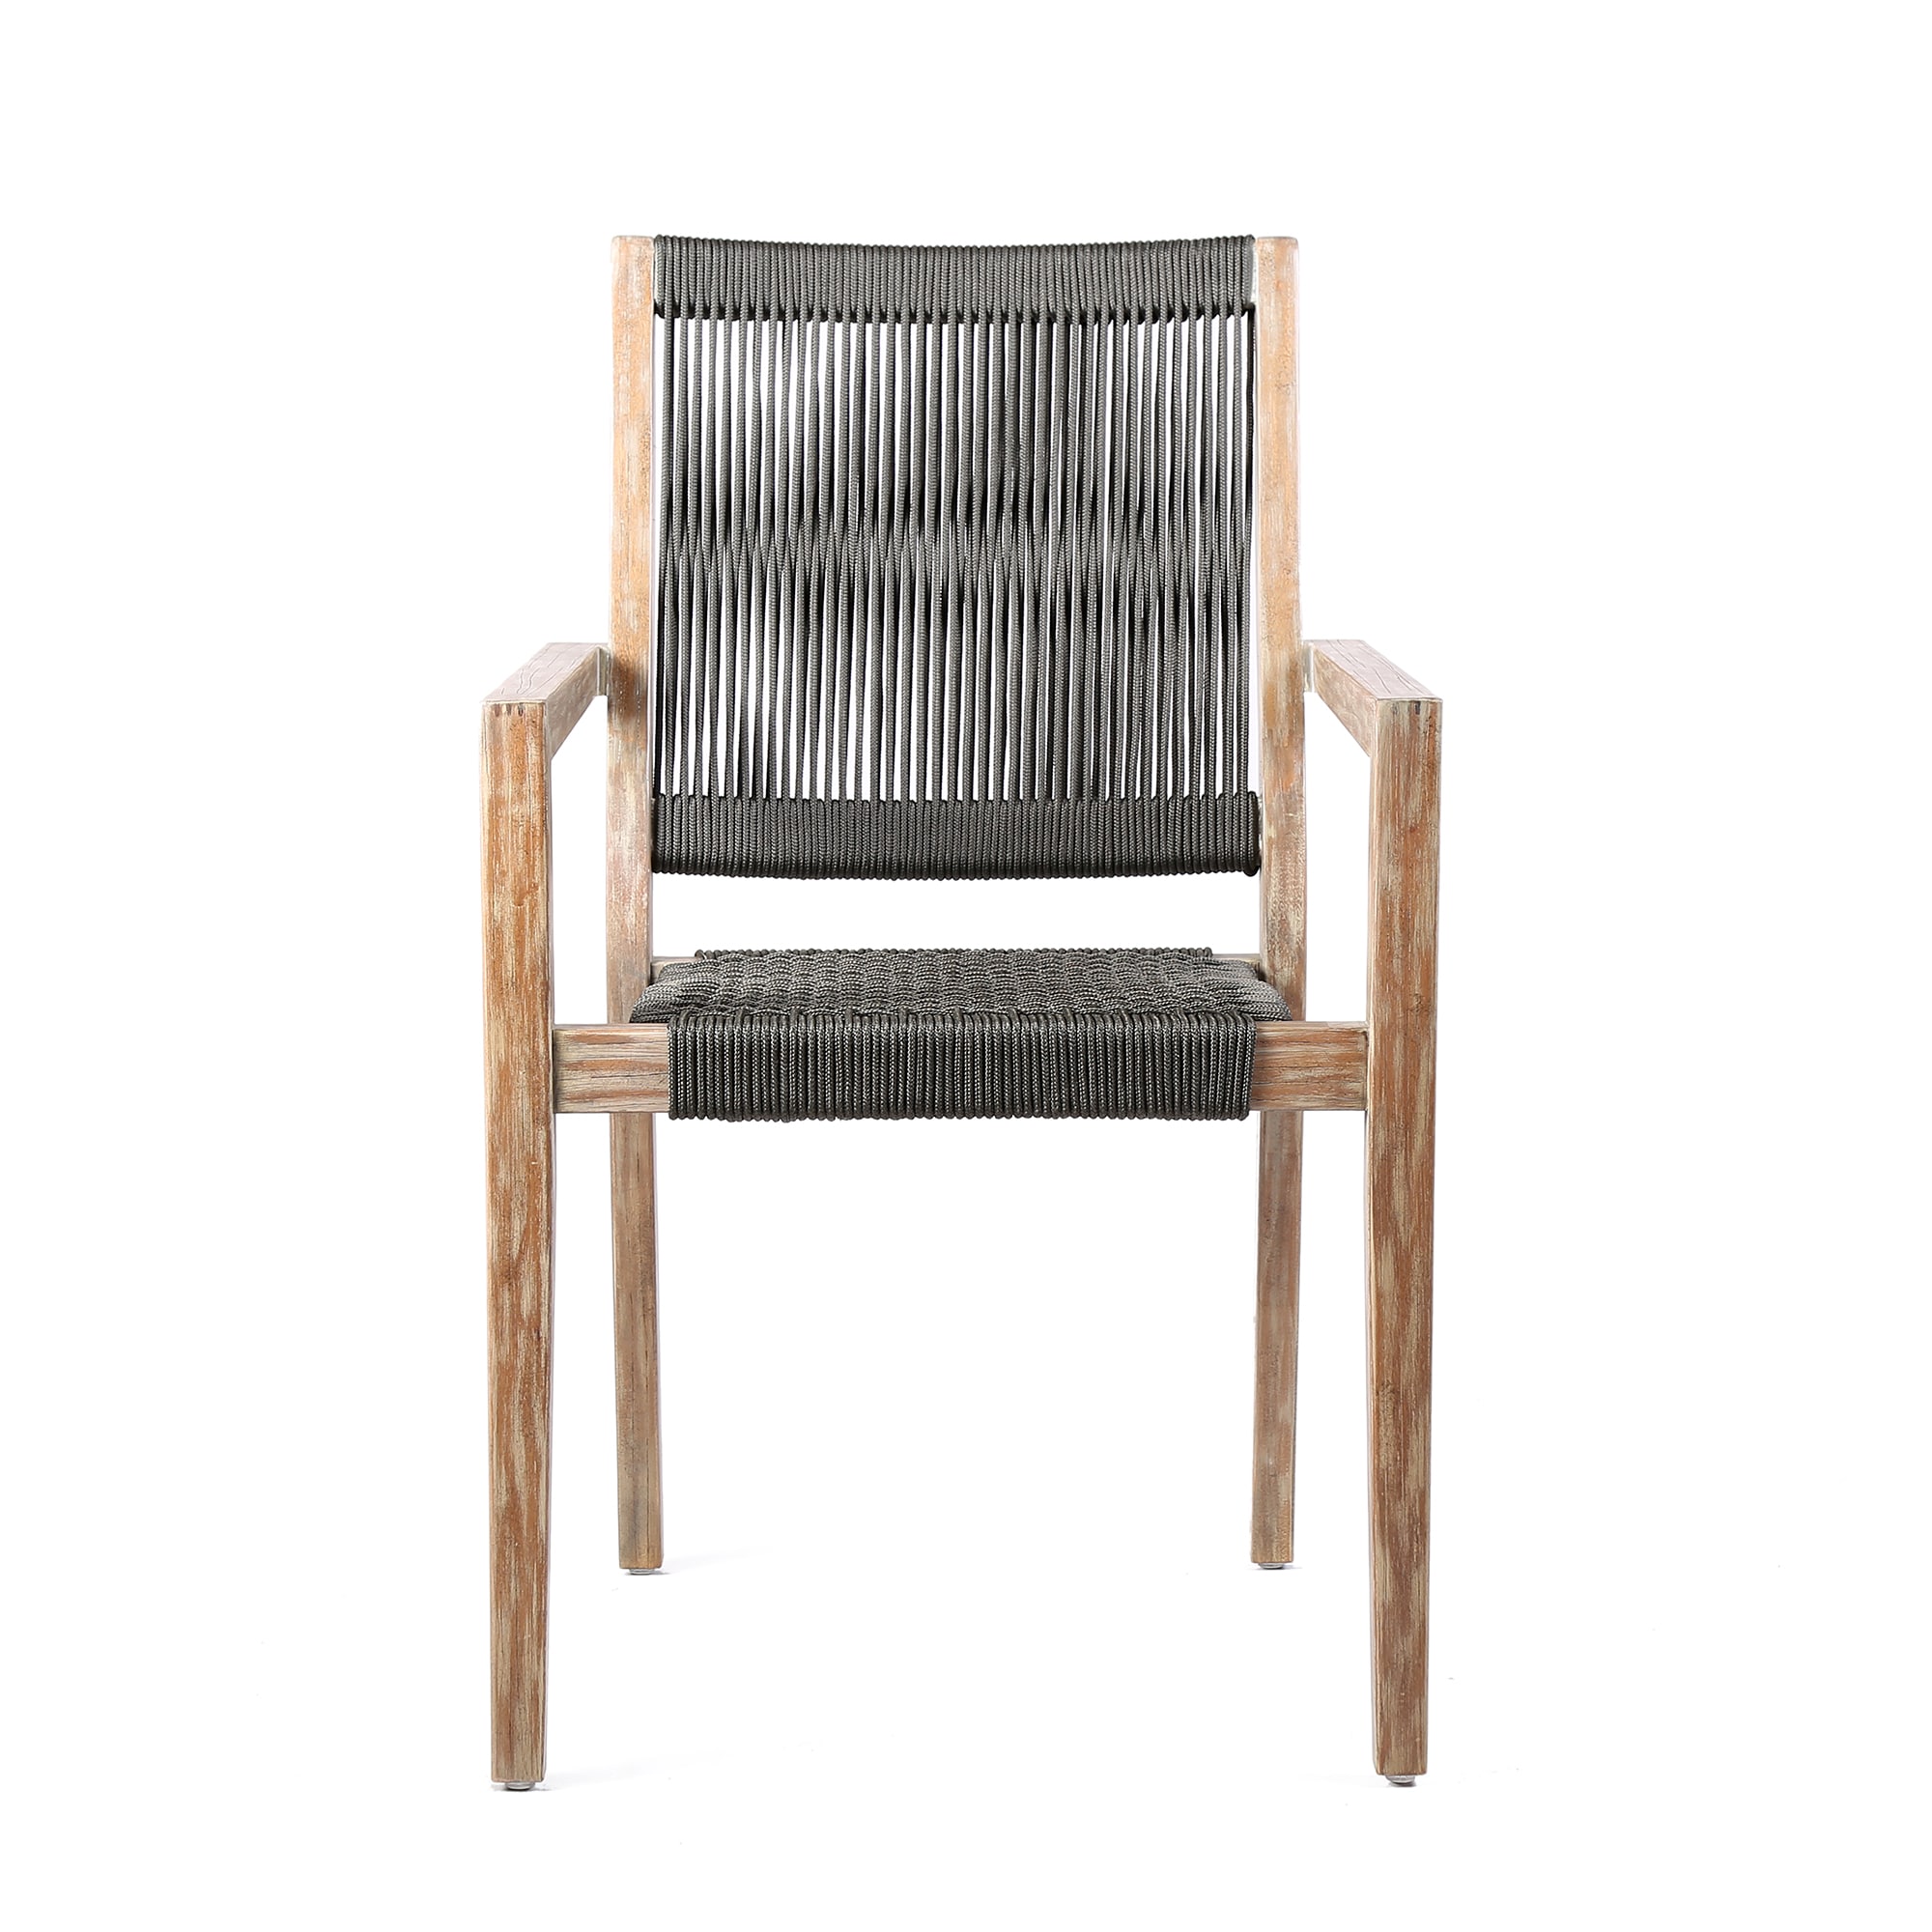 Madsen Outdoor Eucalyptus Wood and Charcoal Rope Dining Chairs with Gray Teak Finish (Set of 2)